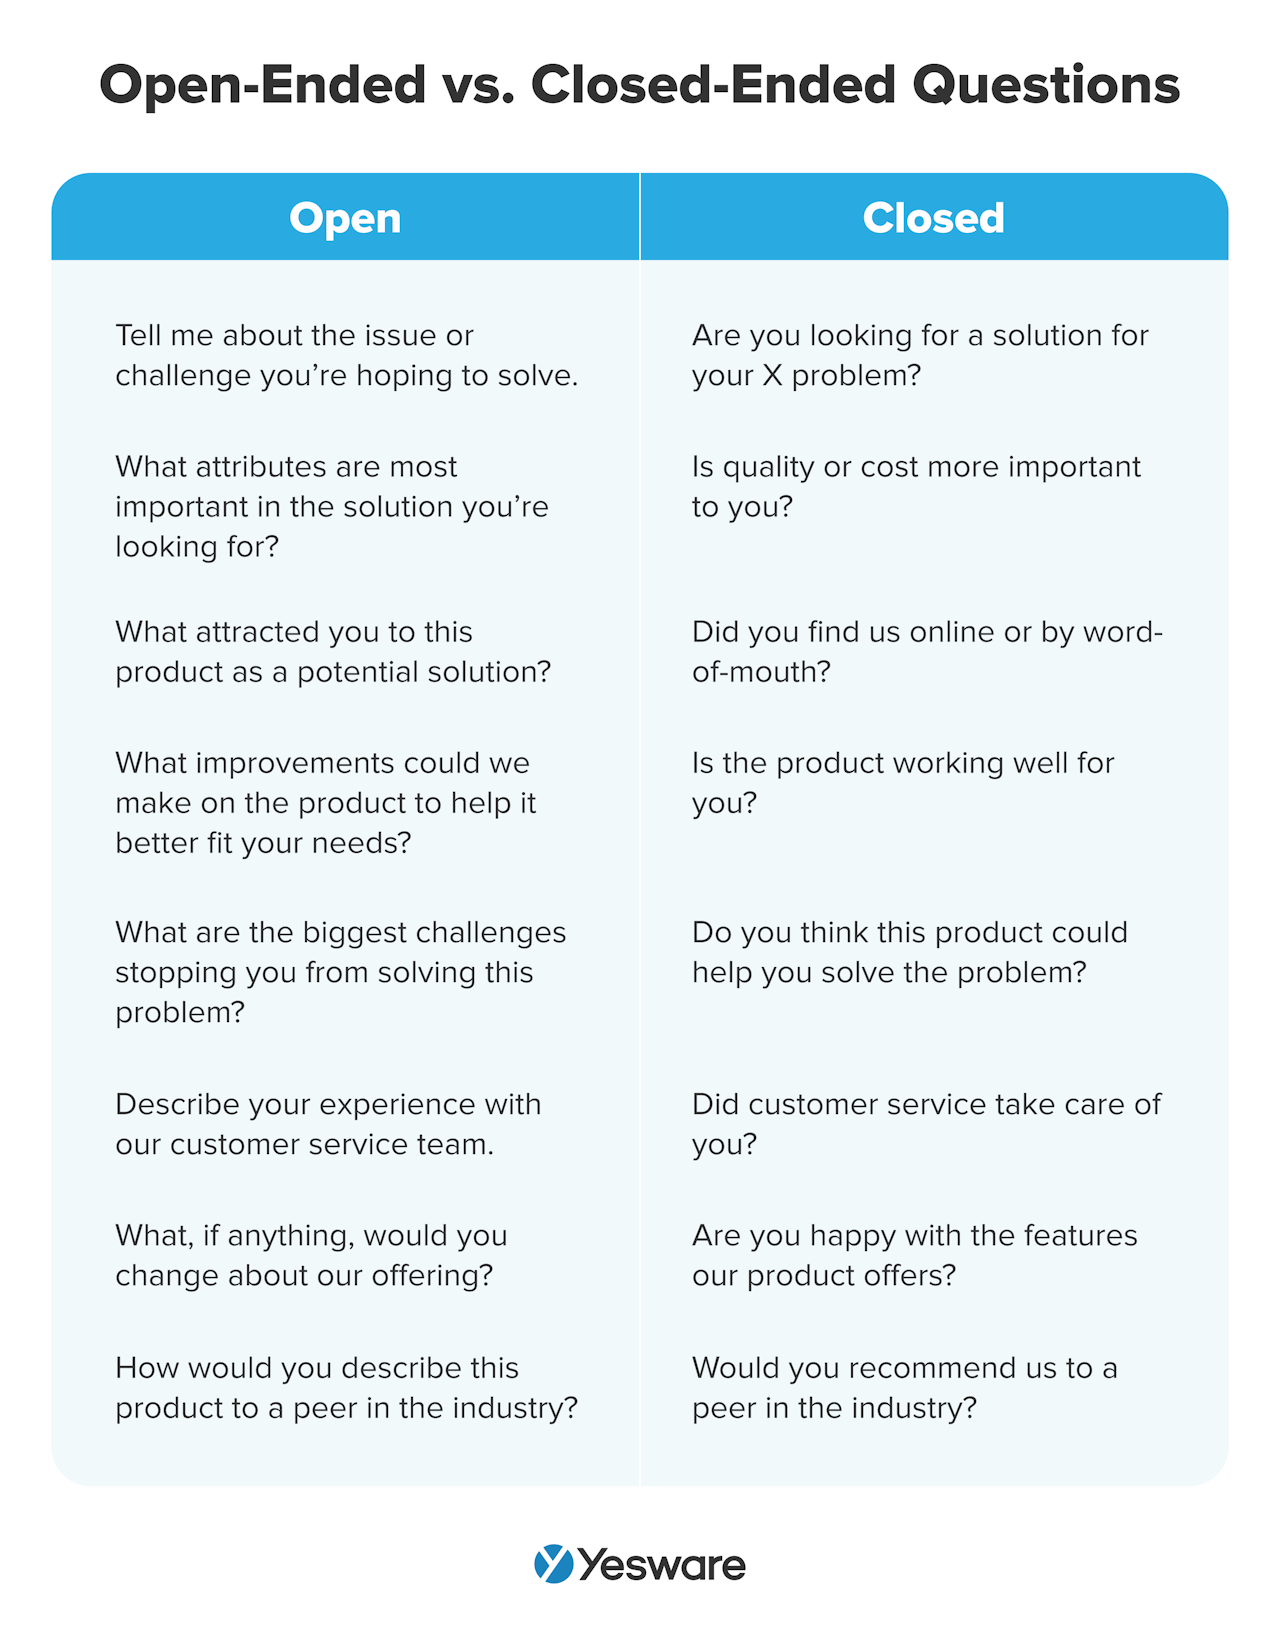 probing questions: open-ended vs closed-ended questions